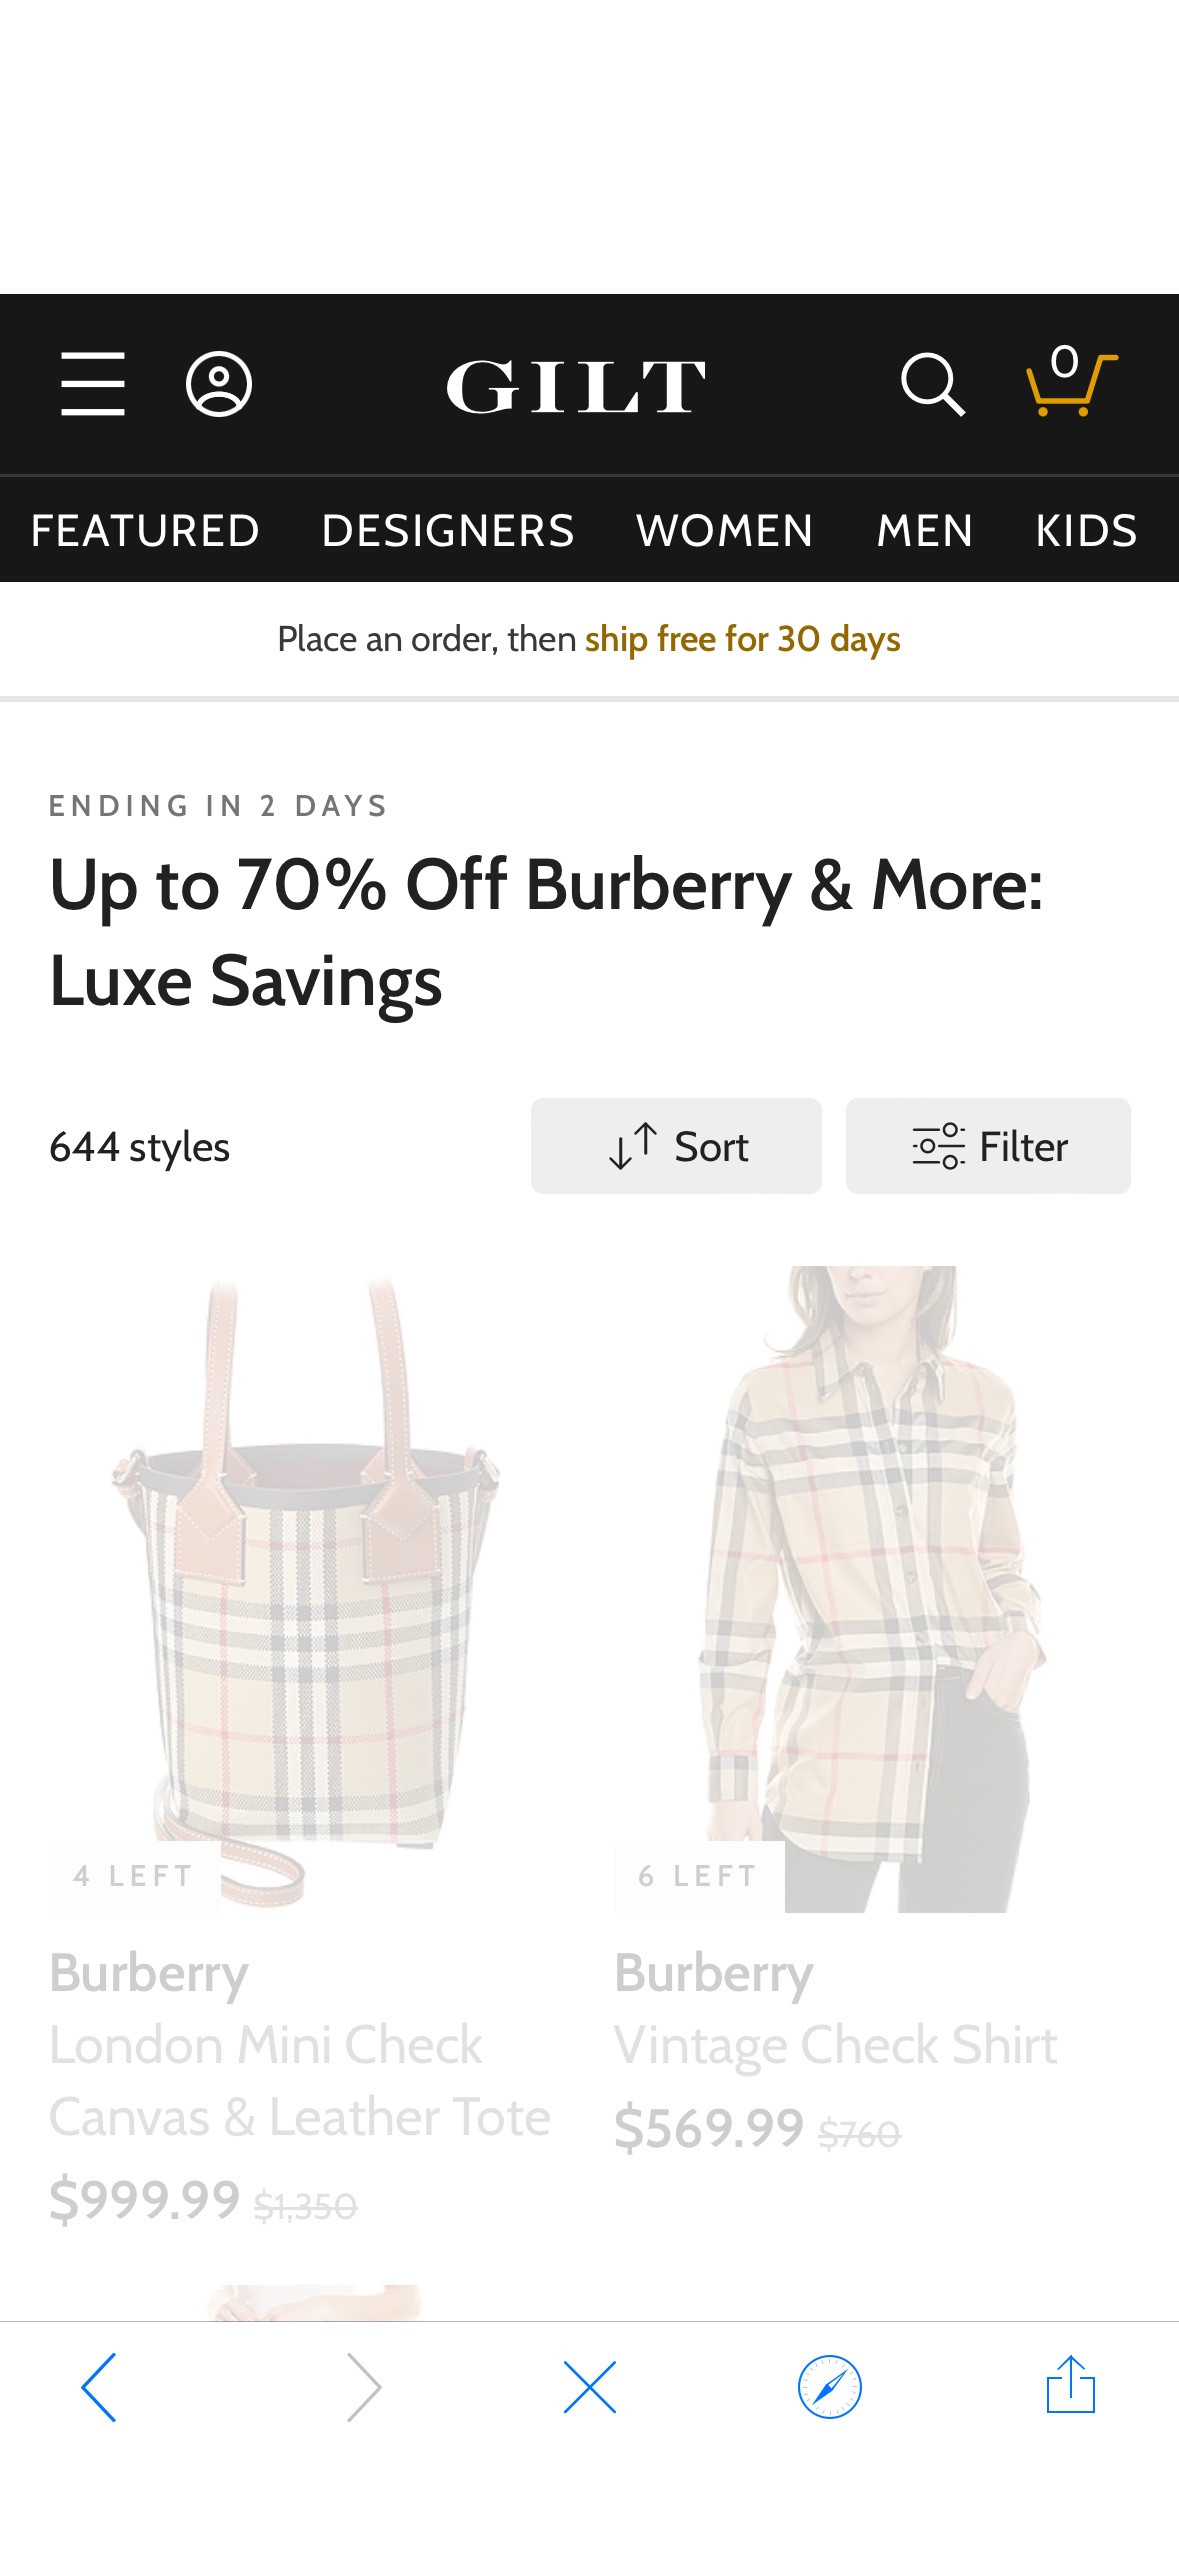 Up to 70% Off Burberry & More: Luxe Savings / Gilt